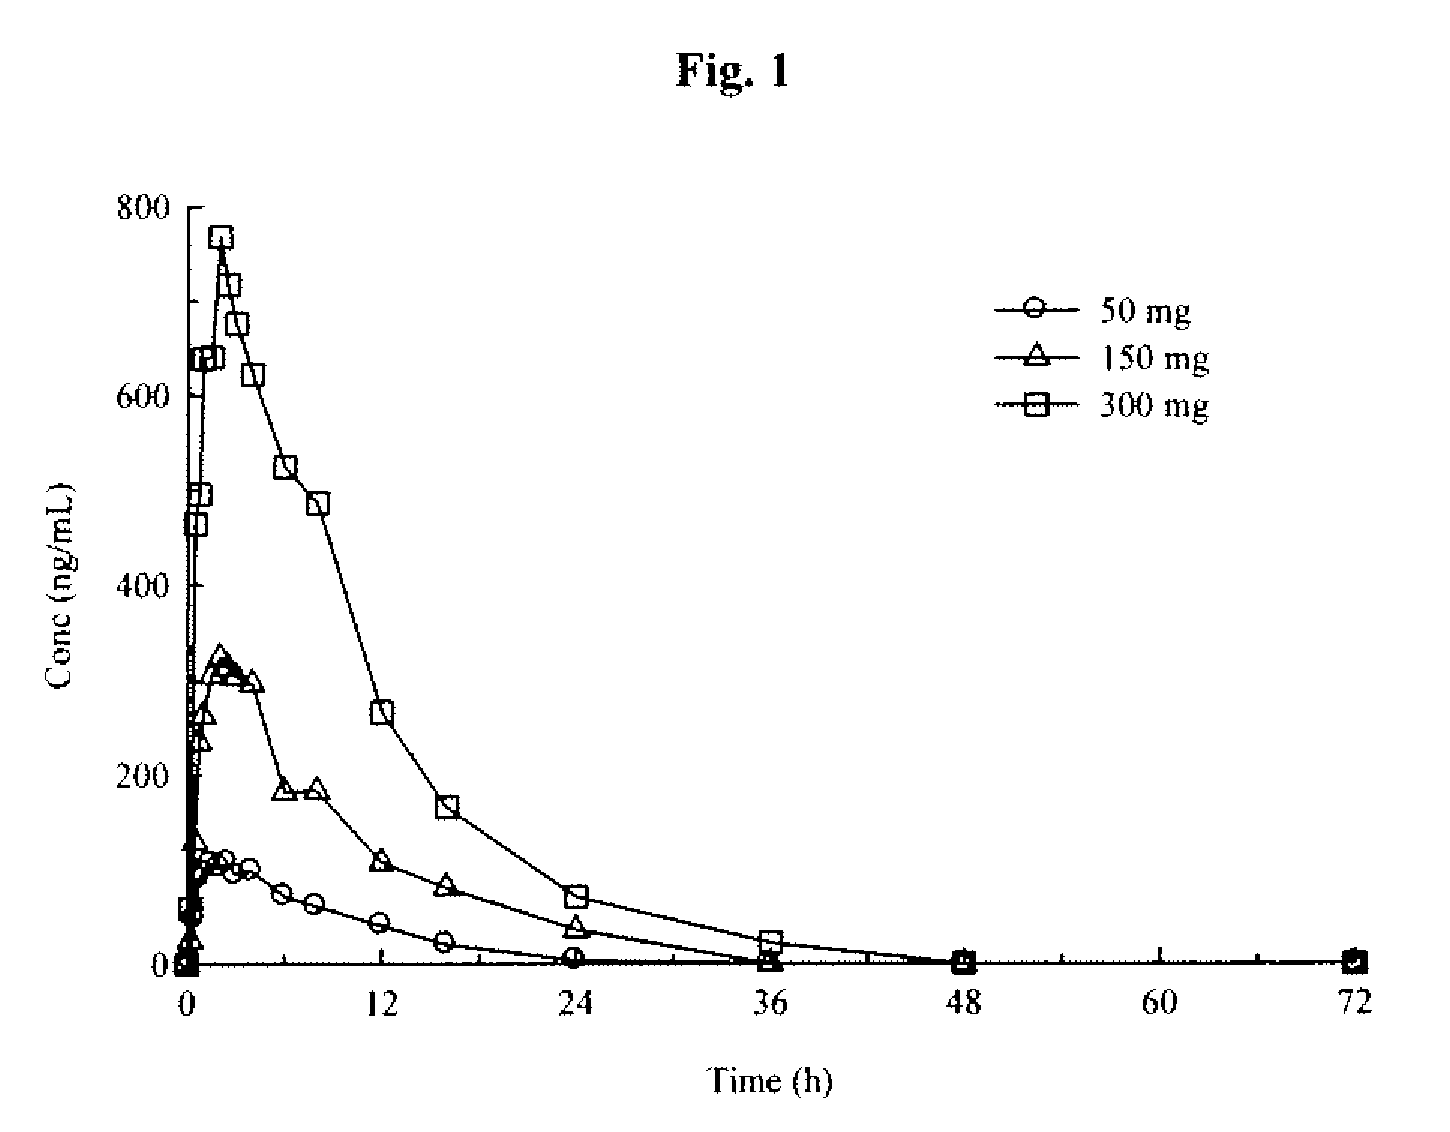 Modified Release Formulations of (6R)-4,5,6,7-tetrahydro-N6-propyl-2,6-benzothiazole-diamine and Methods of Using the Same